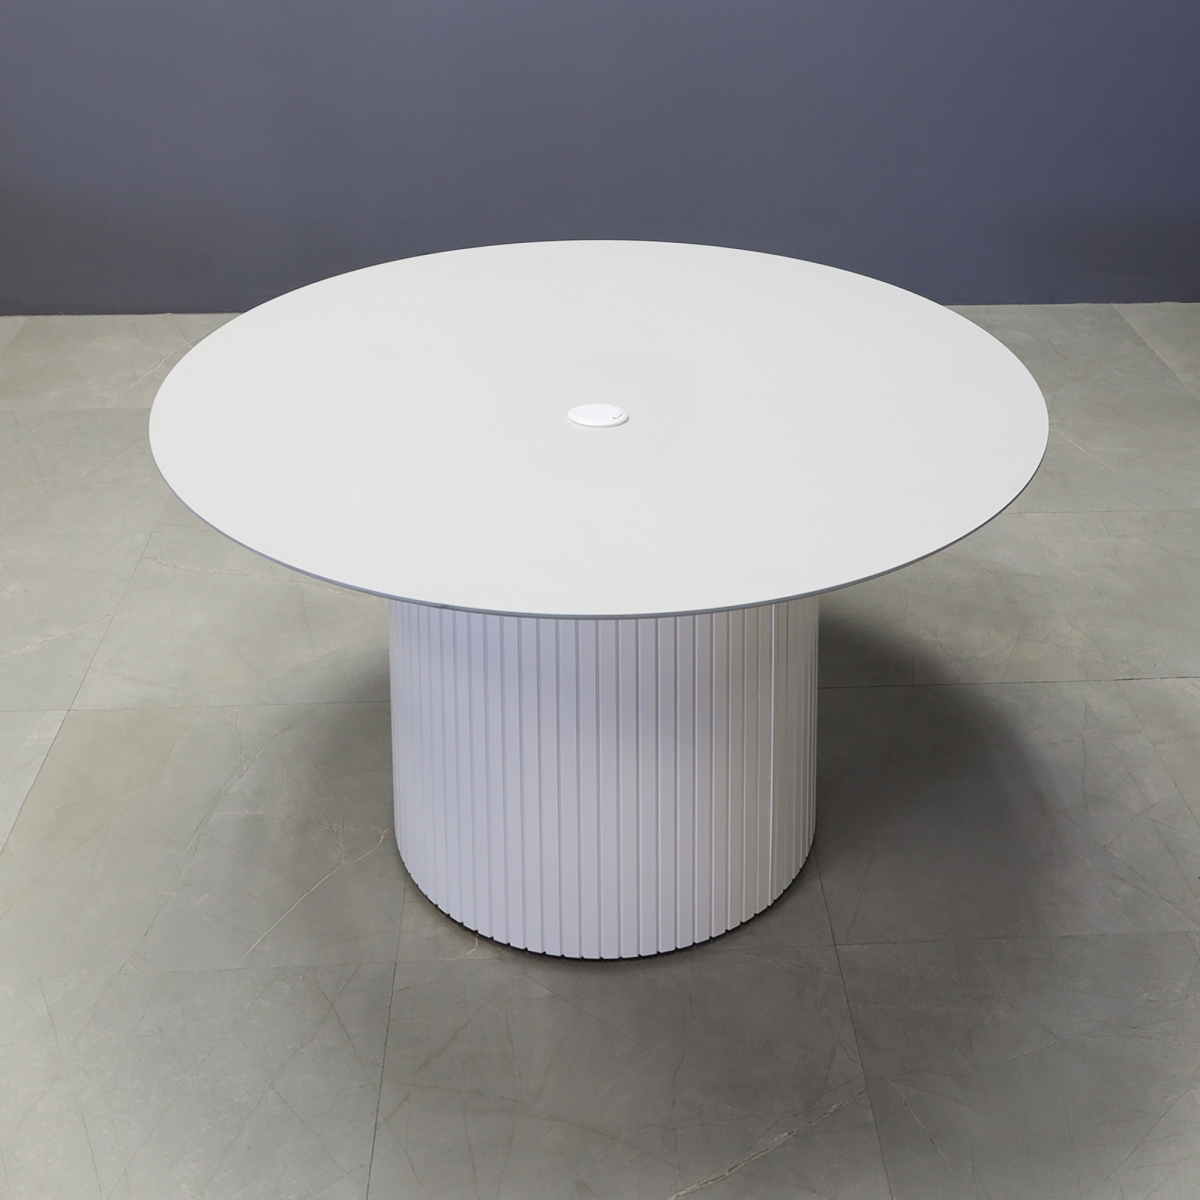 Aurora Round Conference Table In Light Gray Traceless Engineered Stone - 50 In. - Stock #33